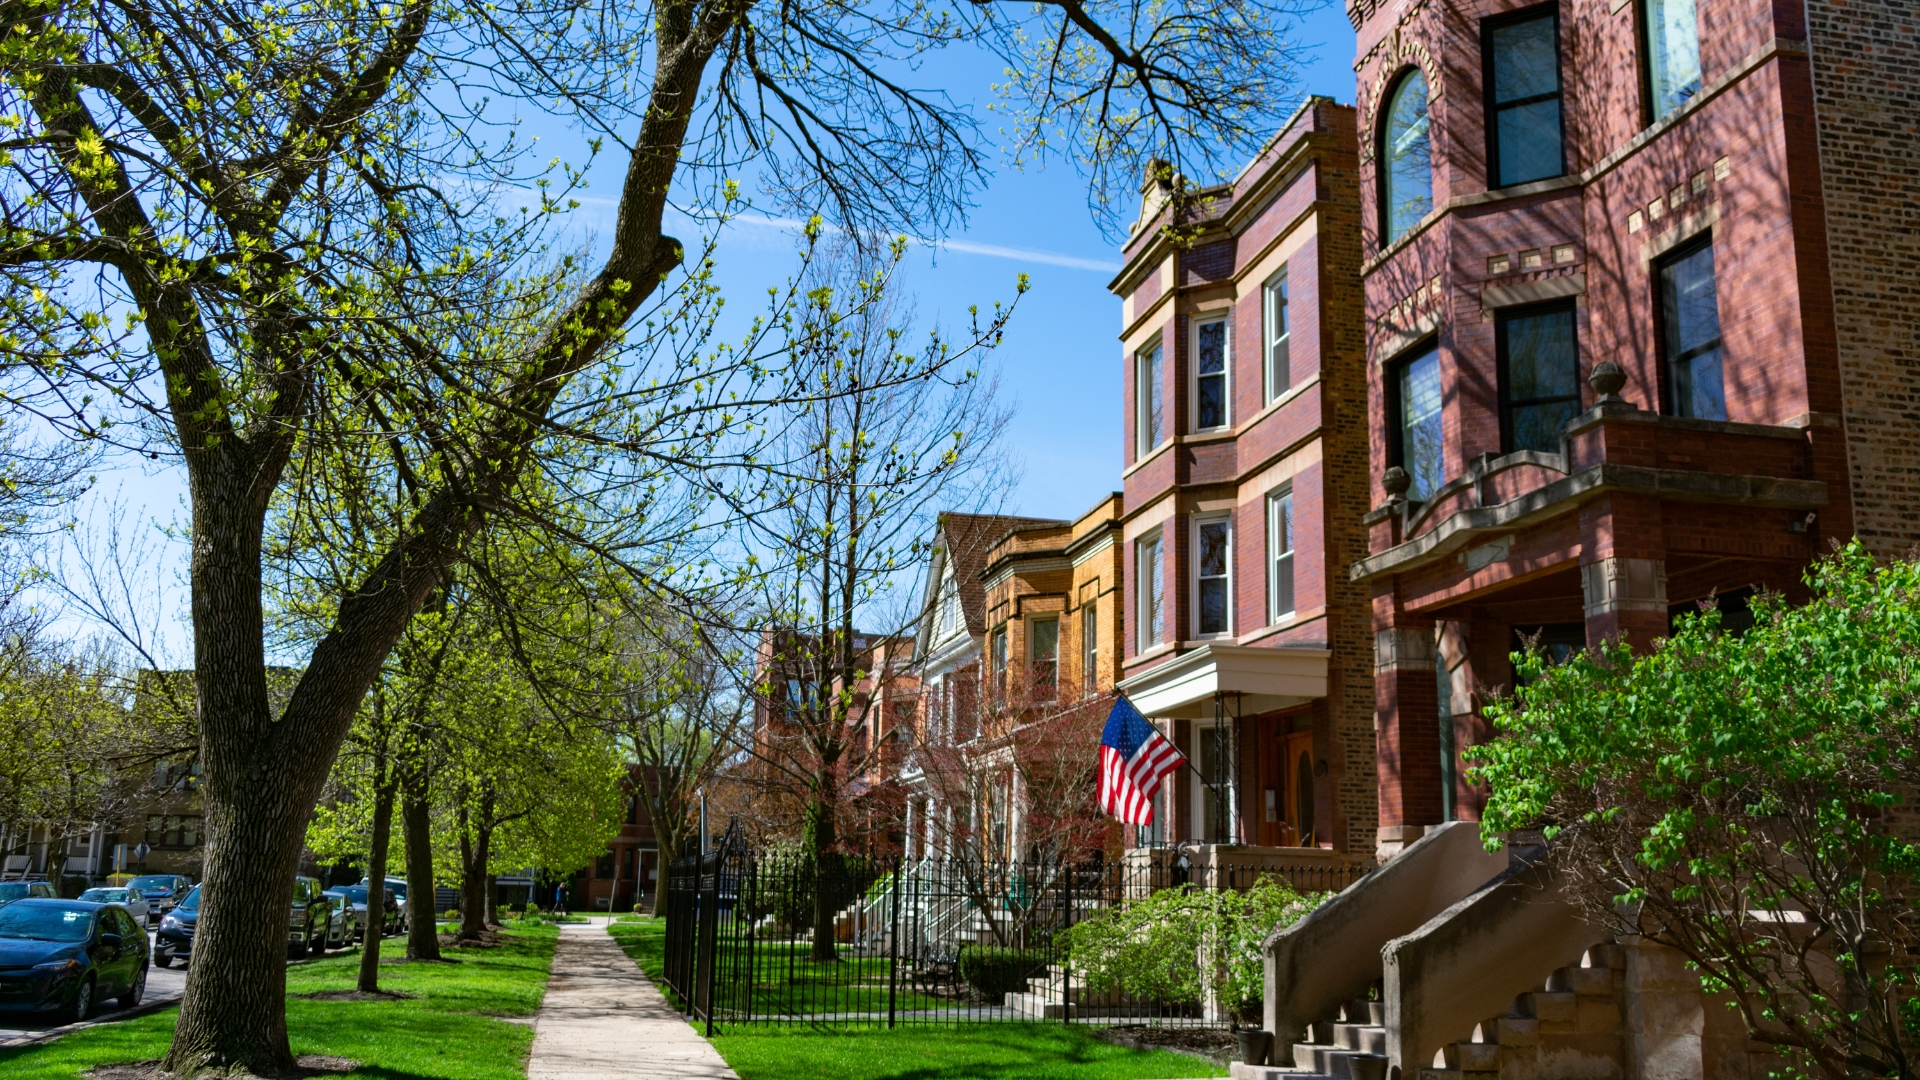 An image of suburban row homes in an Uptown Chicago neighborhood